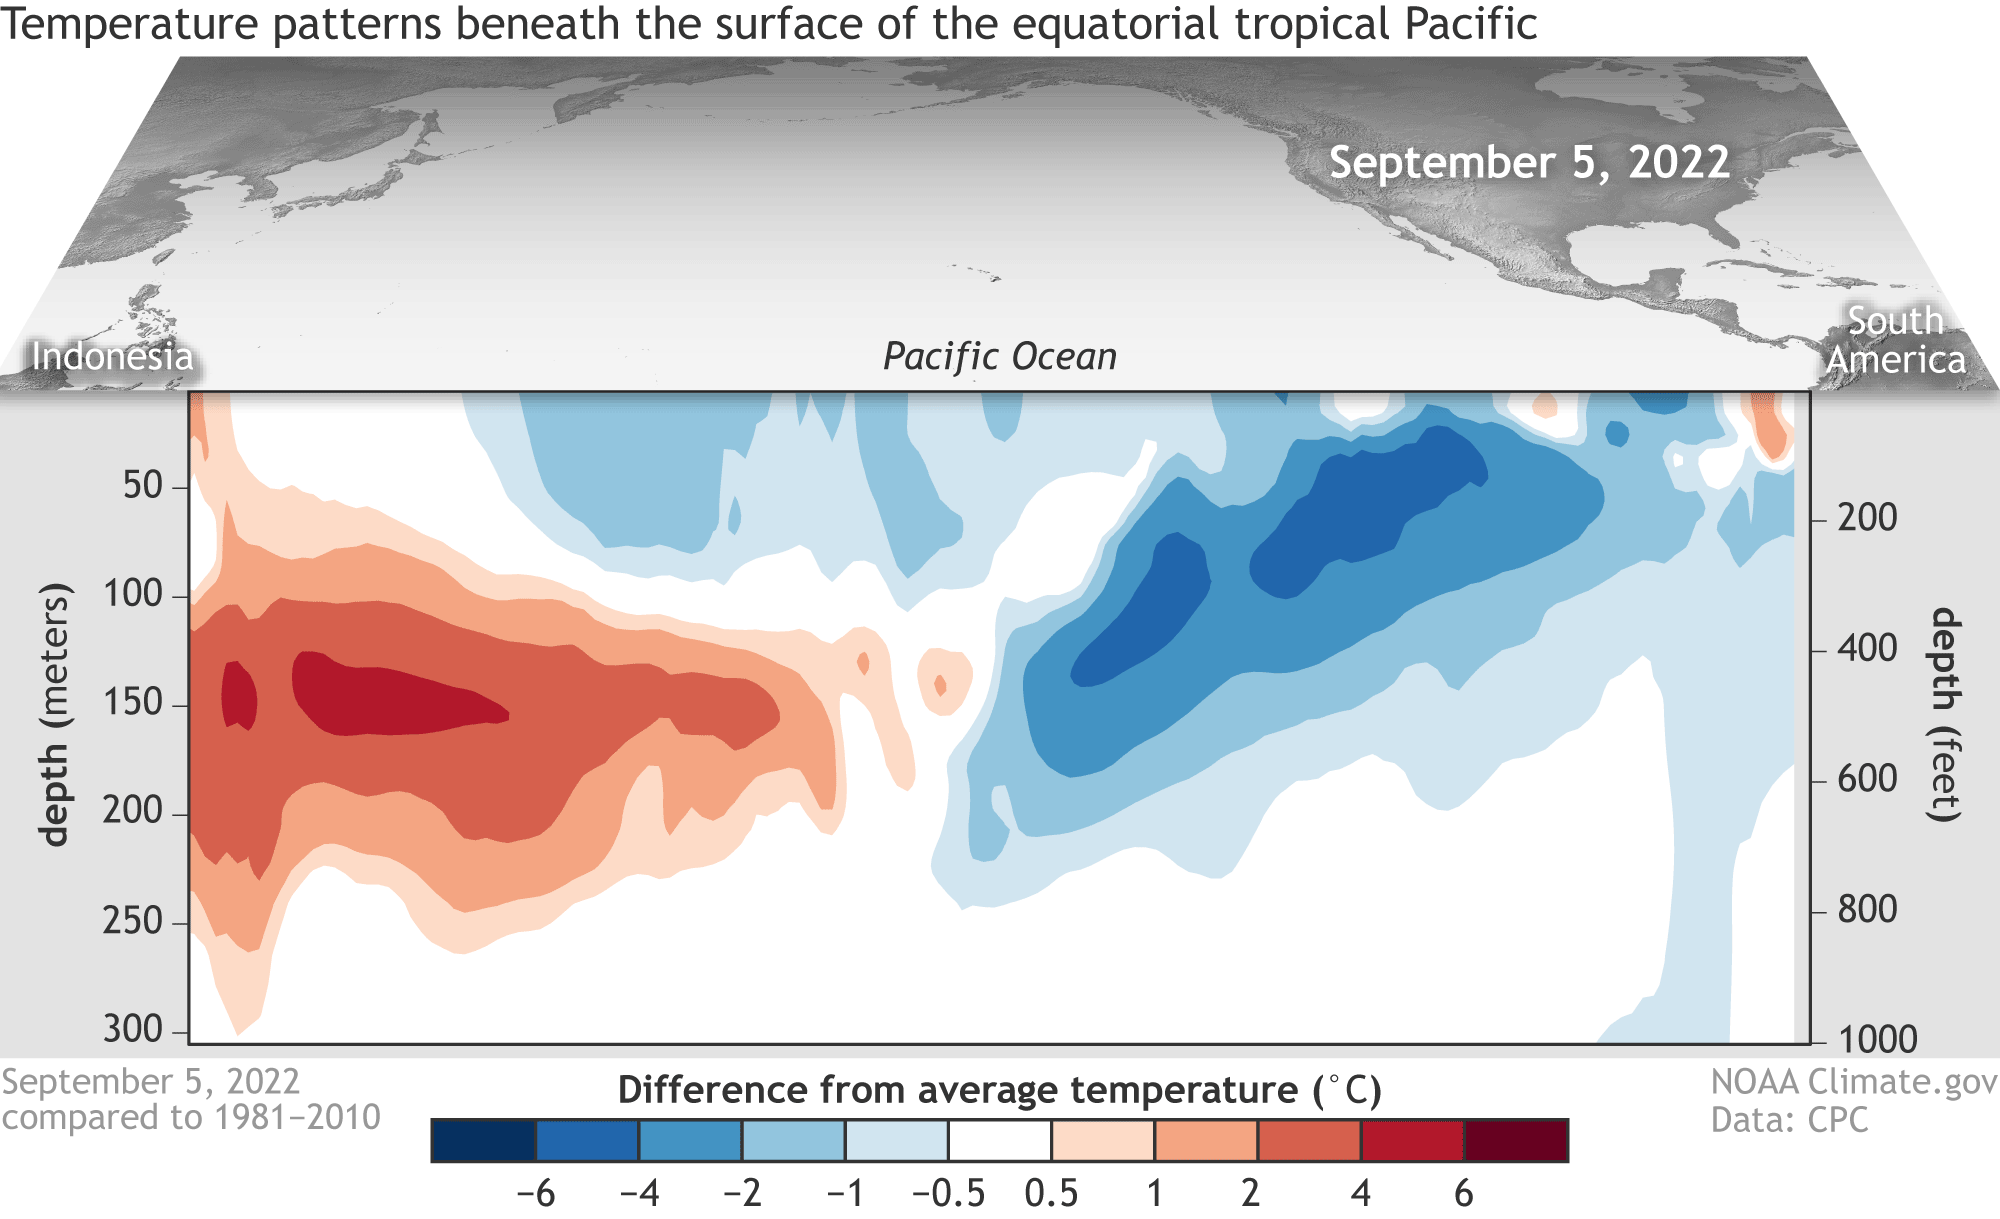 Animation of subsurface temperature anomalies in the tropical Pacific